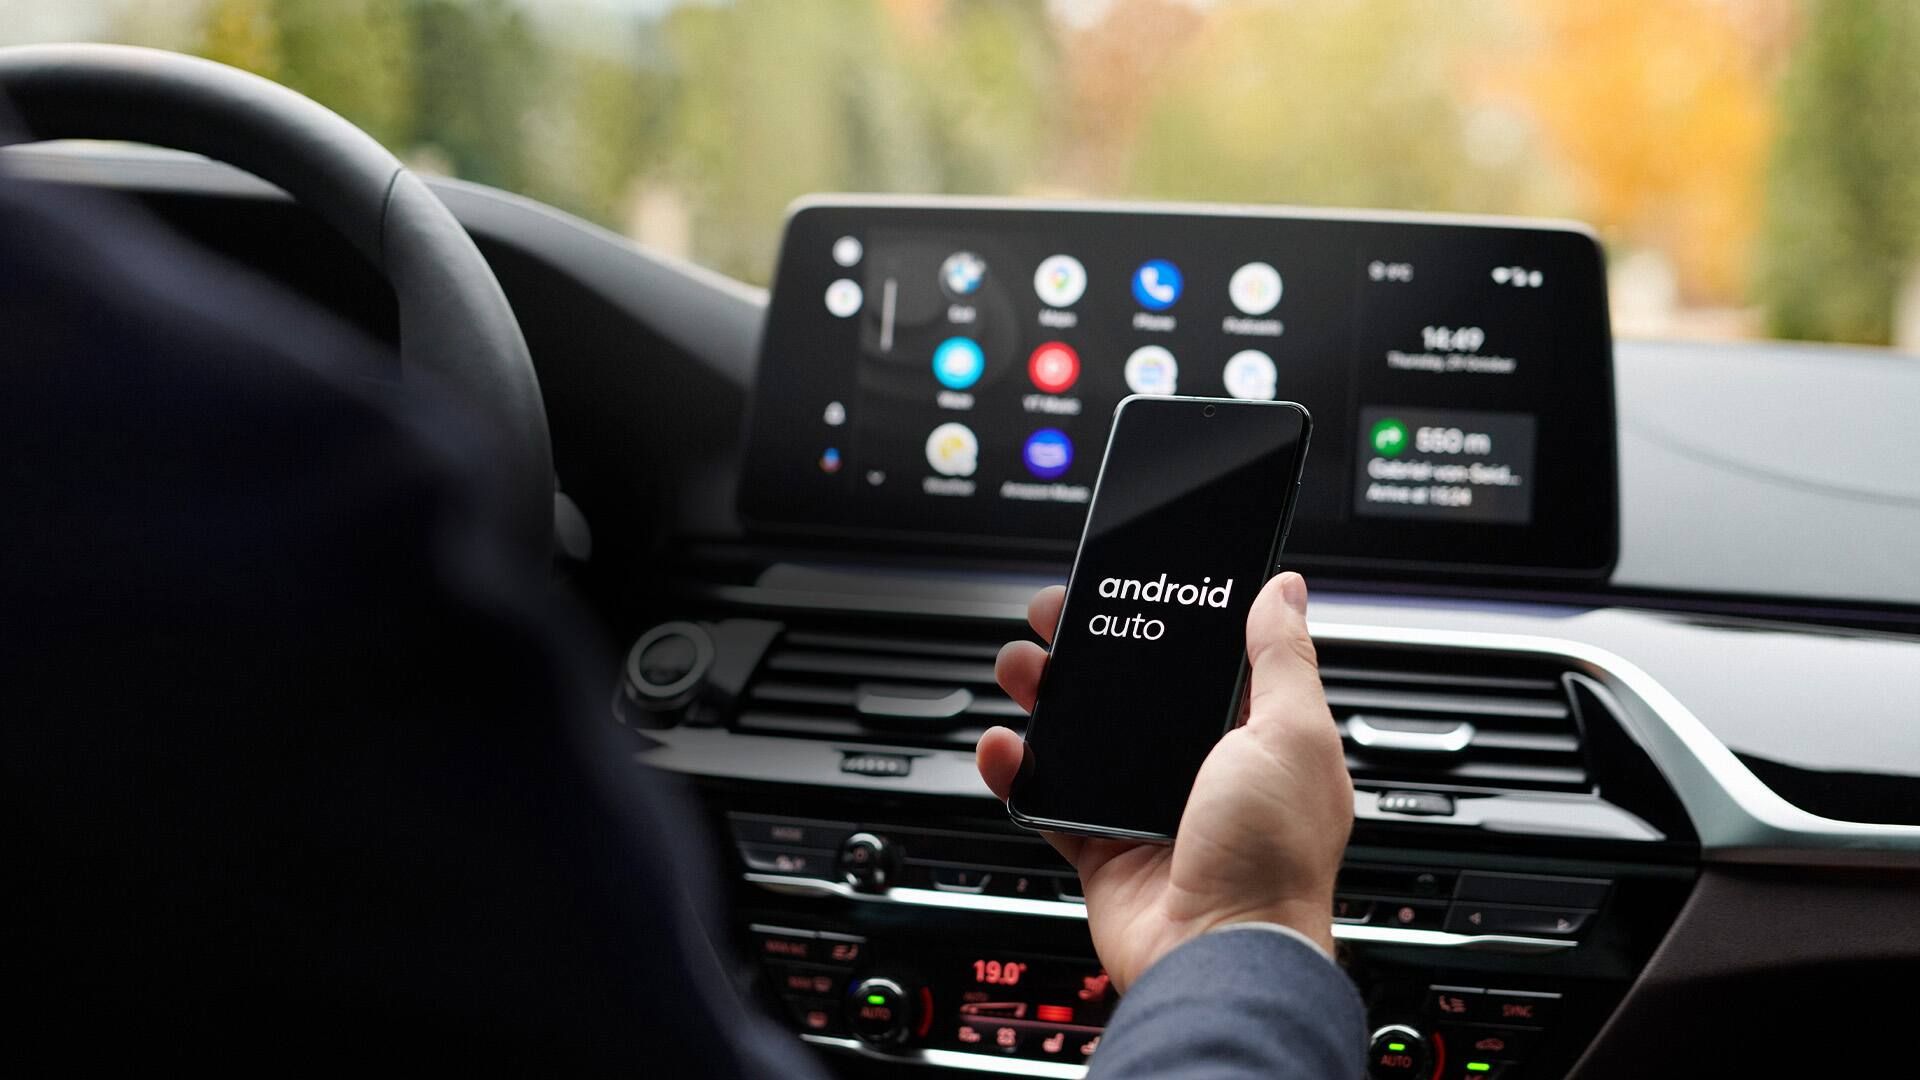 How to get the new Android Auto Update